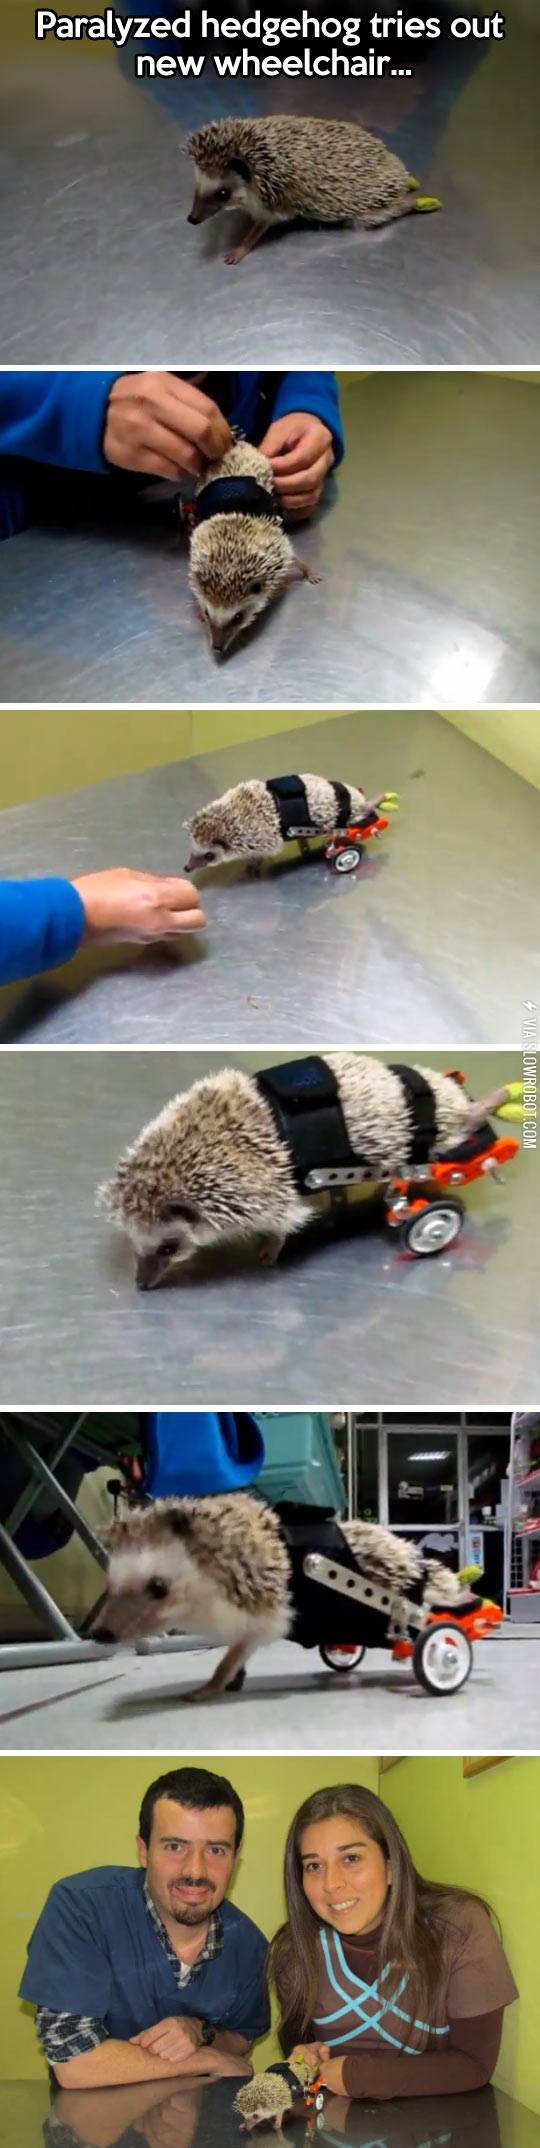 Wheels+for+Hedgie.